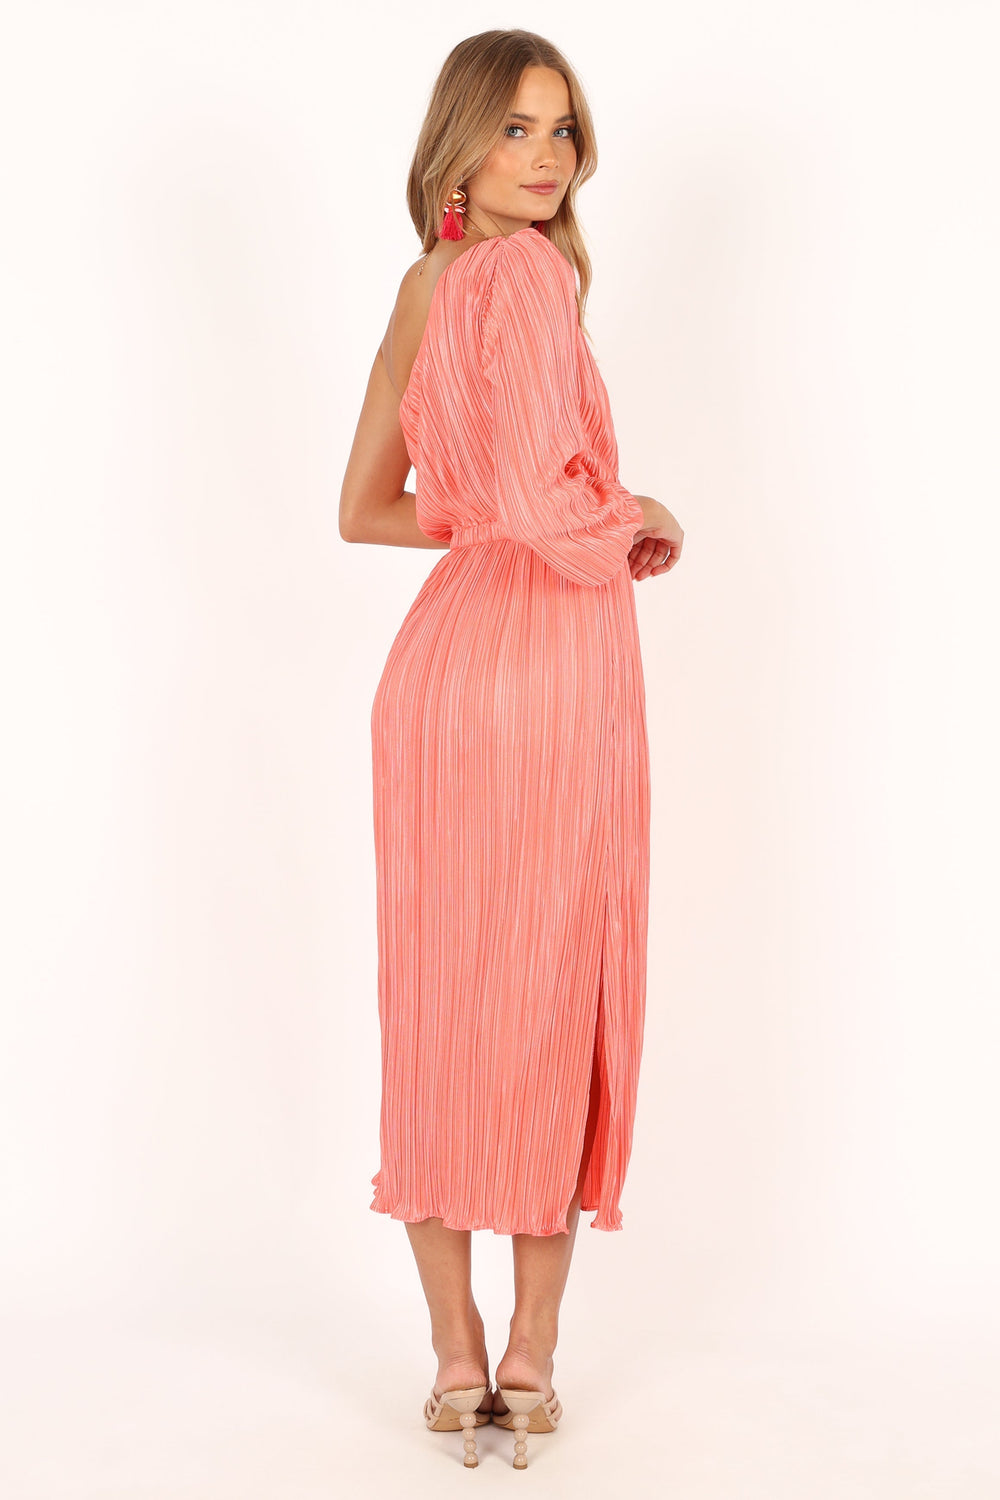 Petal and Pup USA DRESSES Pontee One Shoulder Pleated Midi Dress - Coral